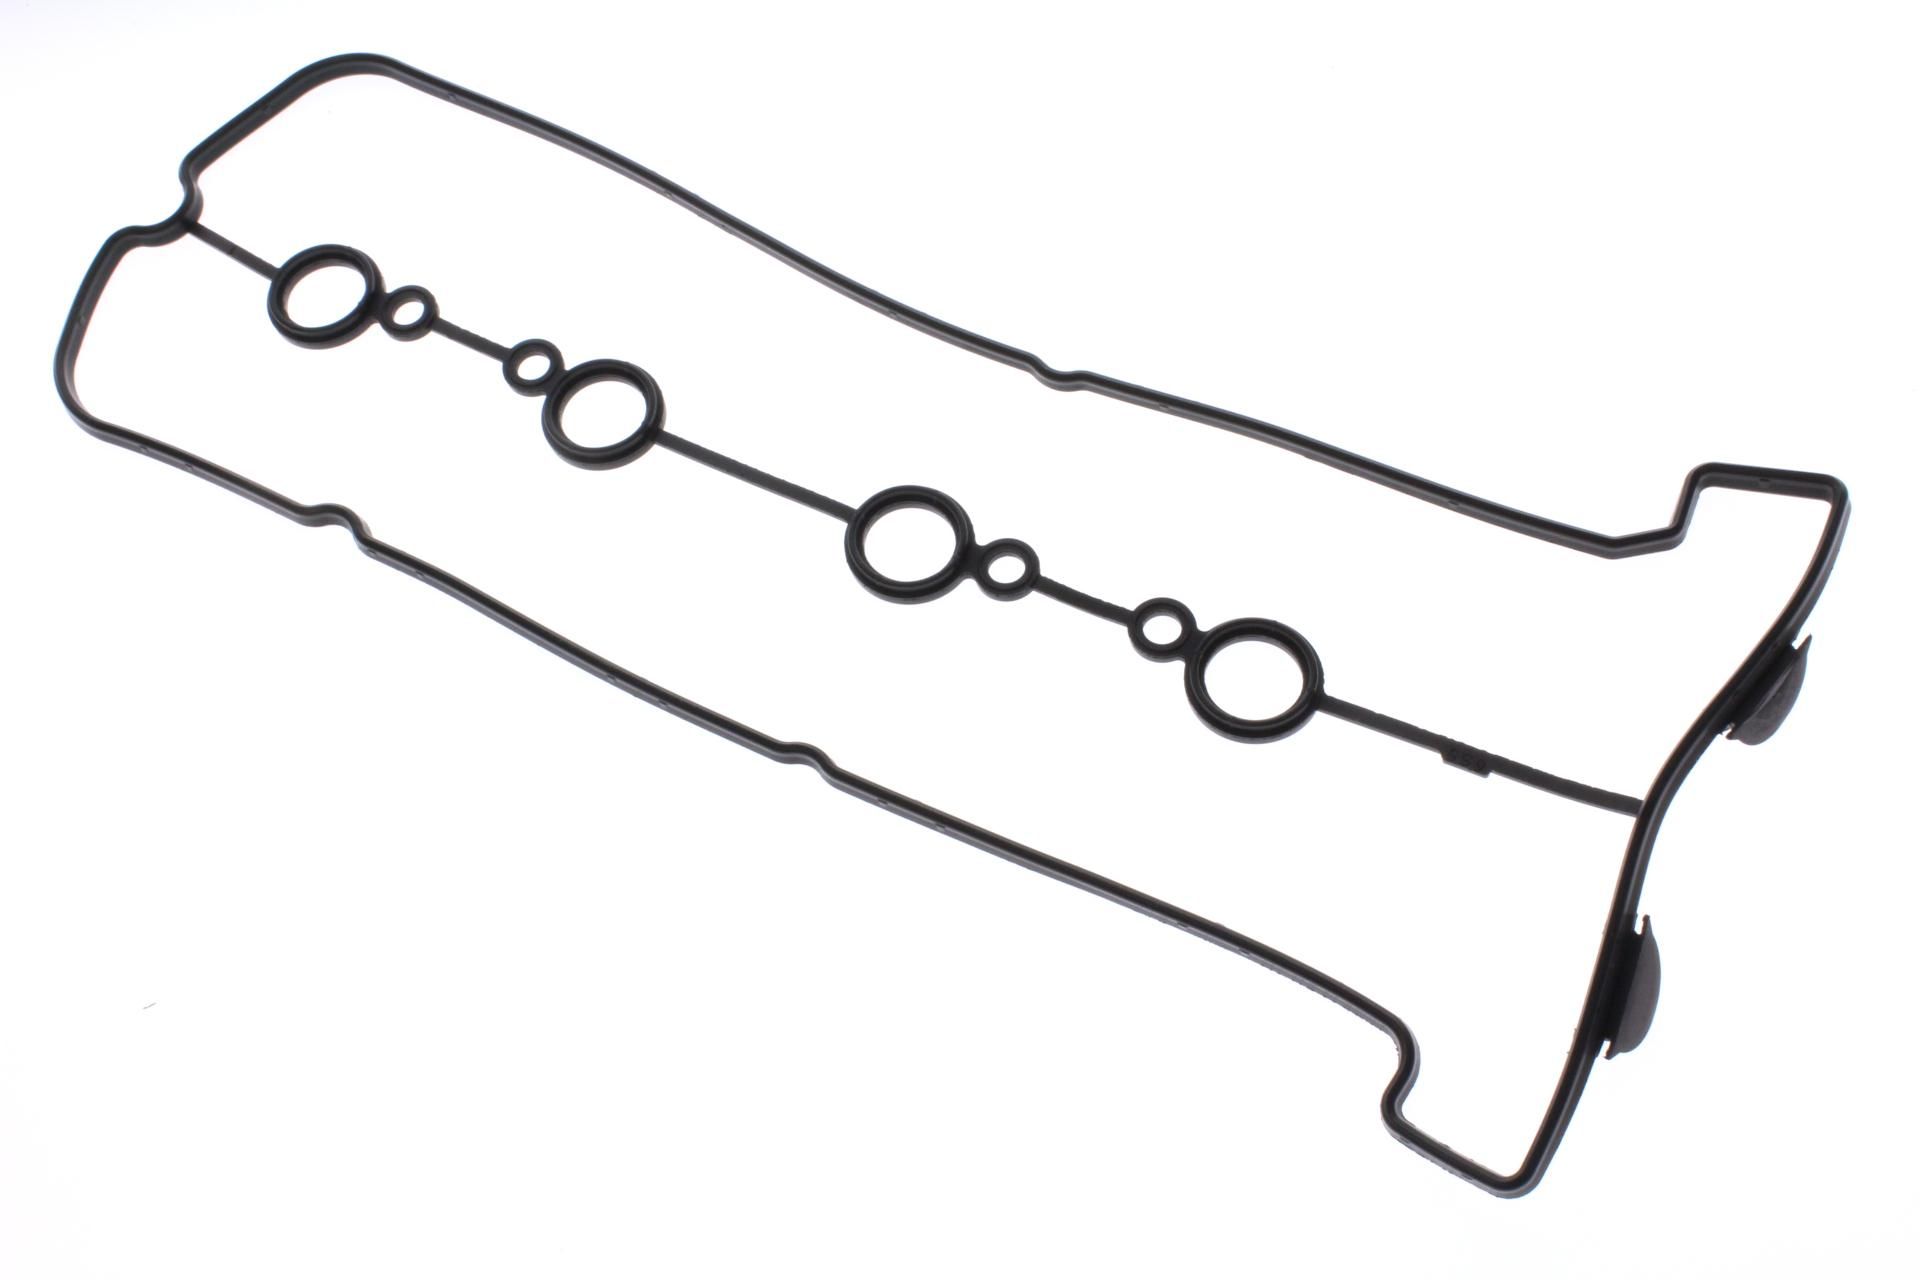 6S5-11193-00-00 HEAD COVER GASKET